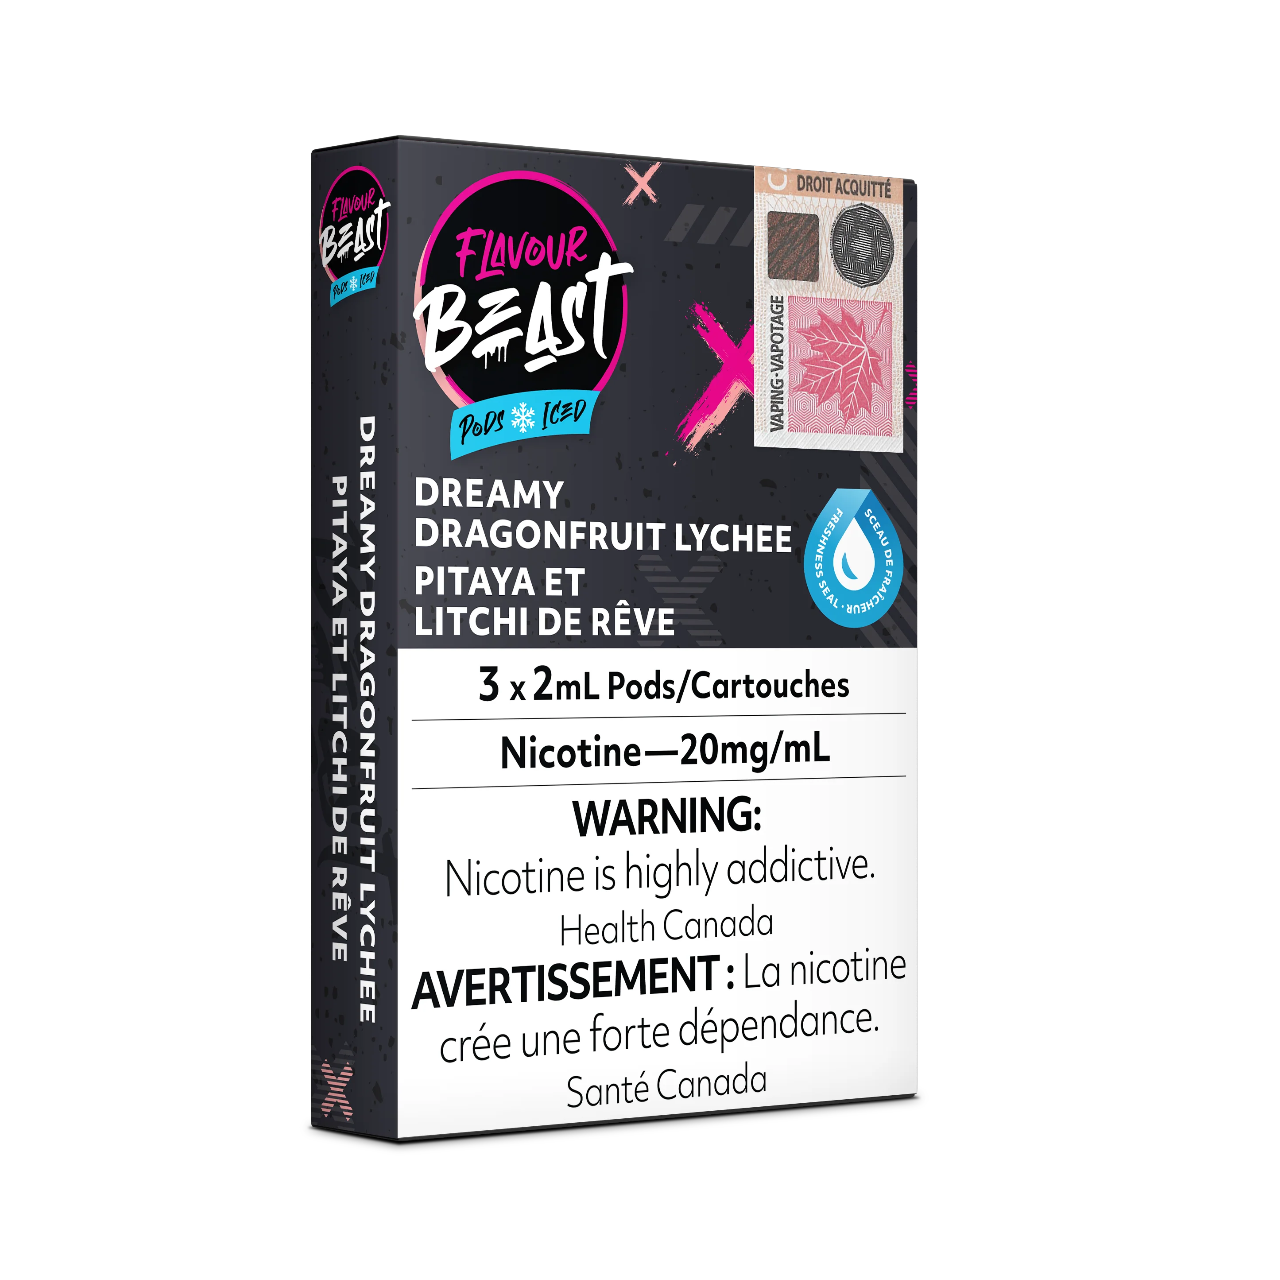 Flavour Beast Dreamy Dragonfruit Lychee Pods Iced 3 x 2mL 20mg